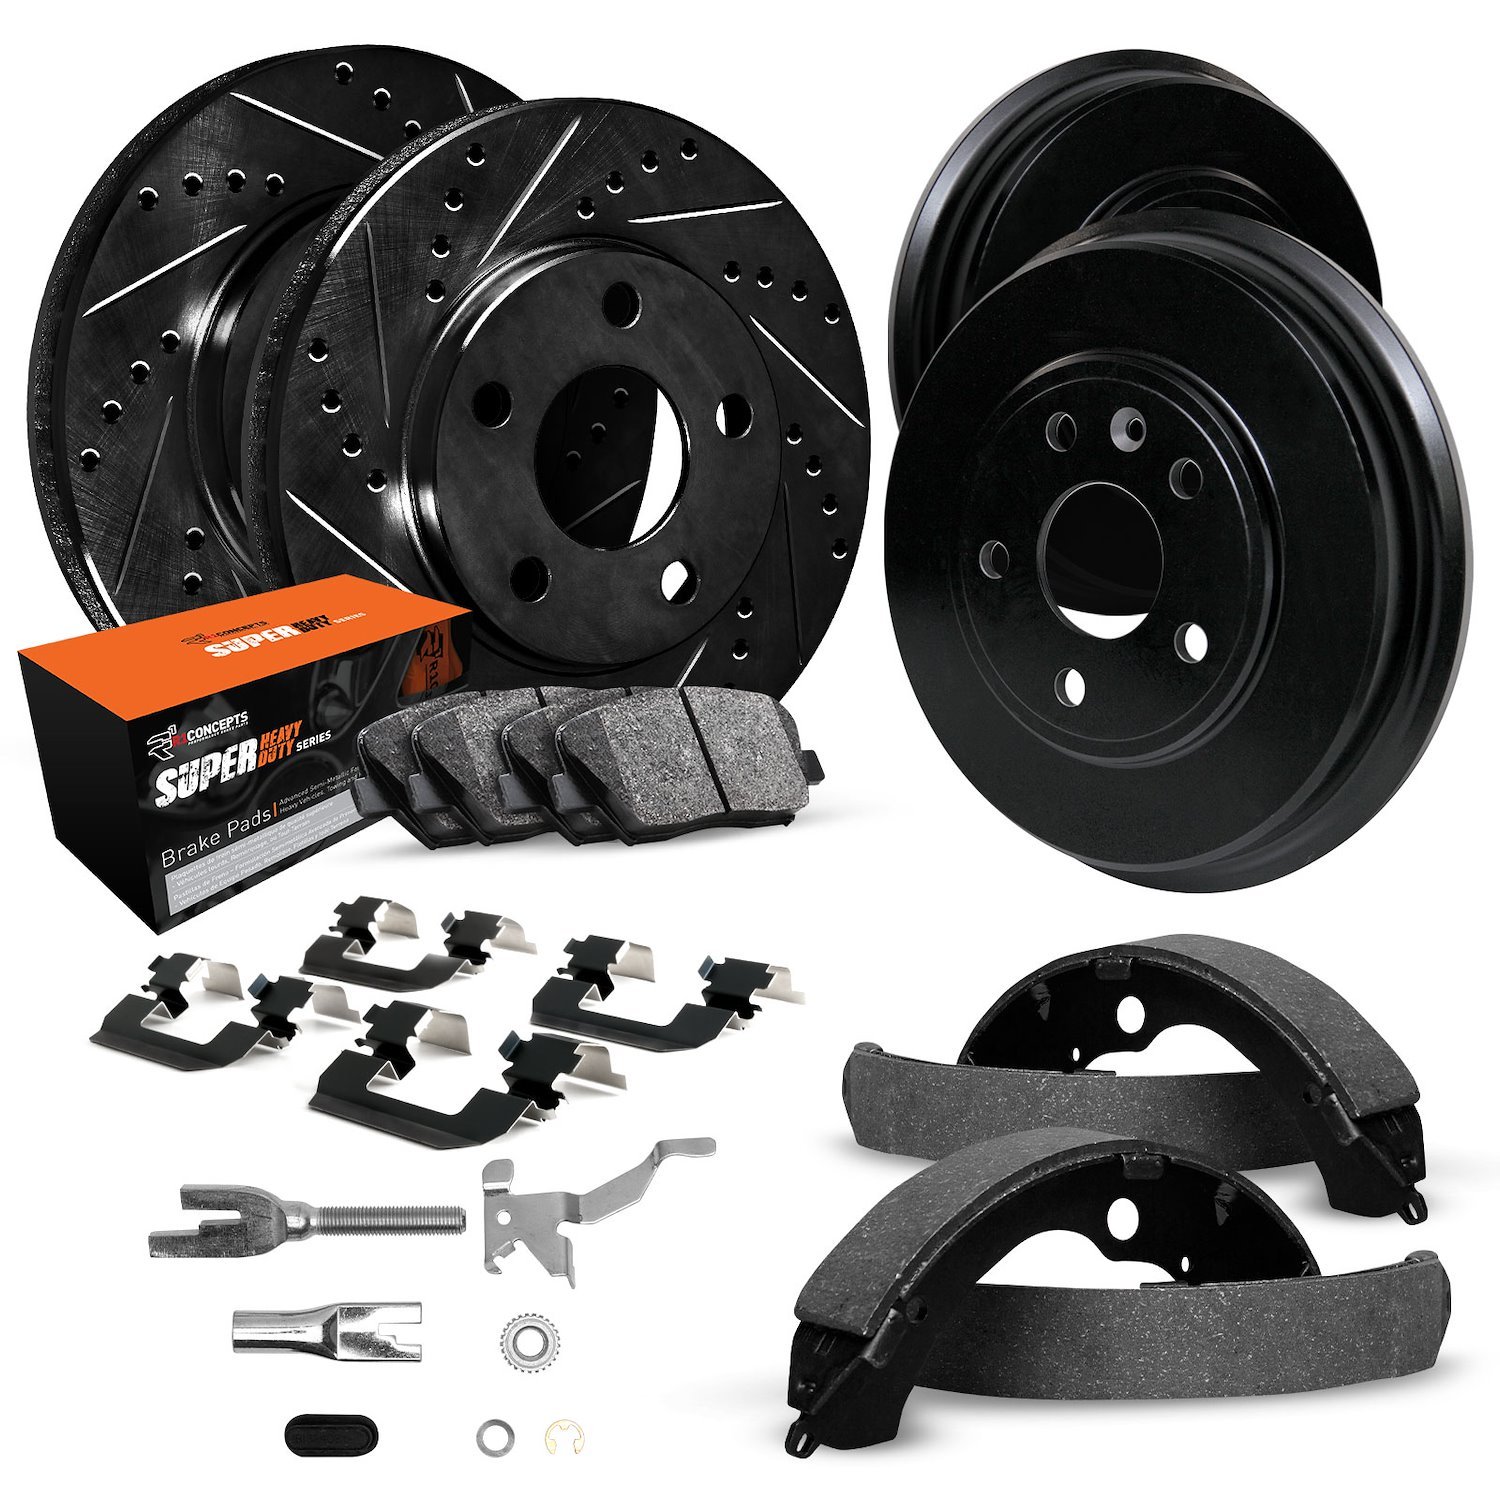 E-Line Drilled/Slotted Black Rotor & Drum Set w/Super-Duty Pads, Shoes, Hardware/Adjusters, 1995-2002 Ford/Lincoln/Mercury/Mazda